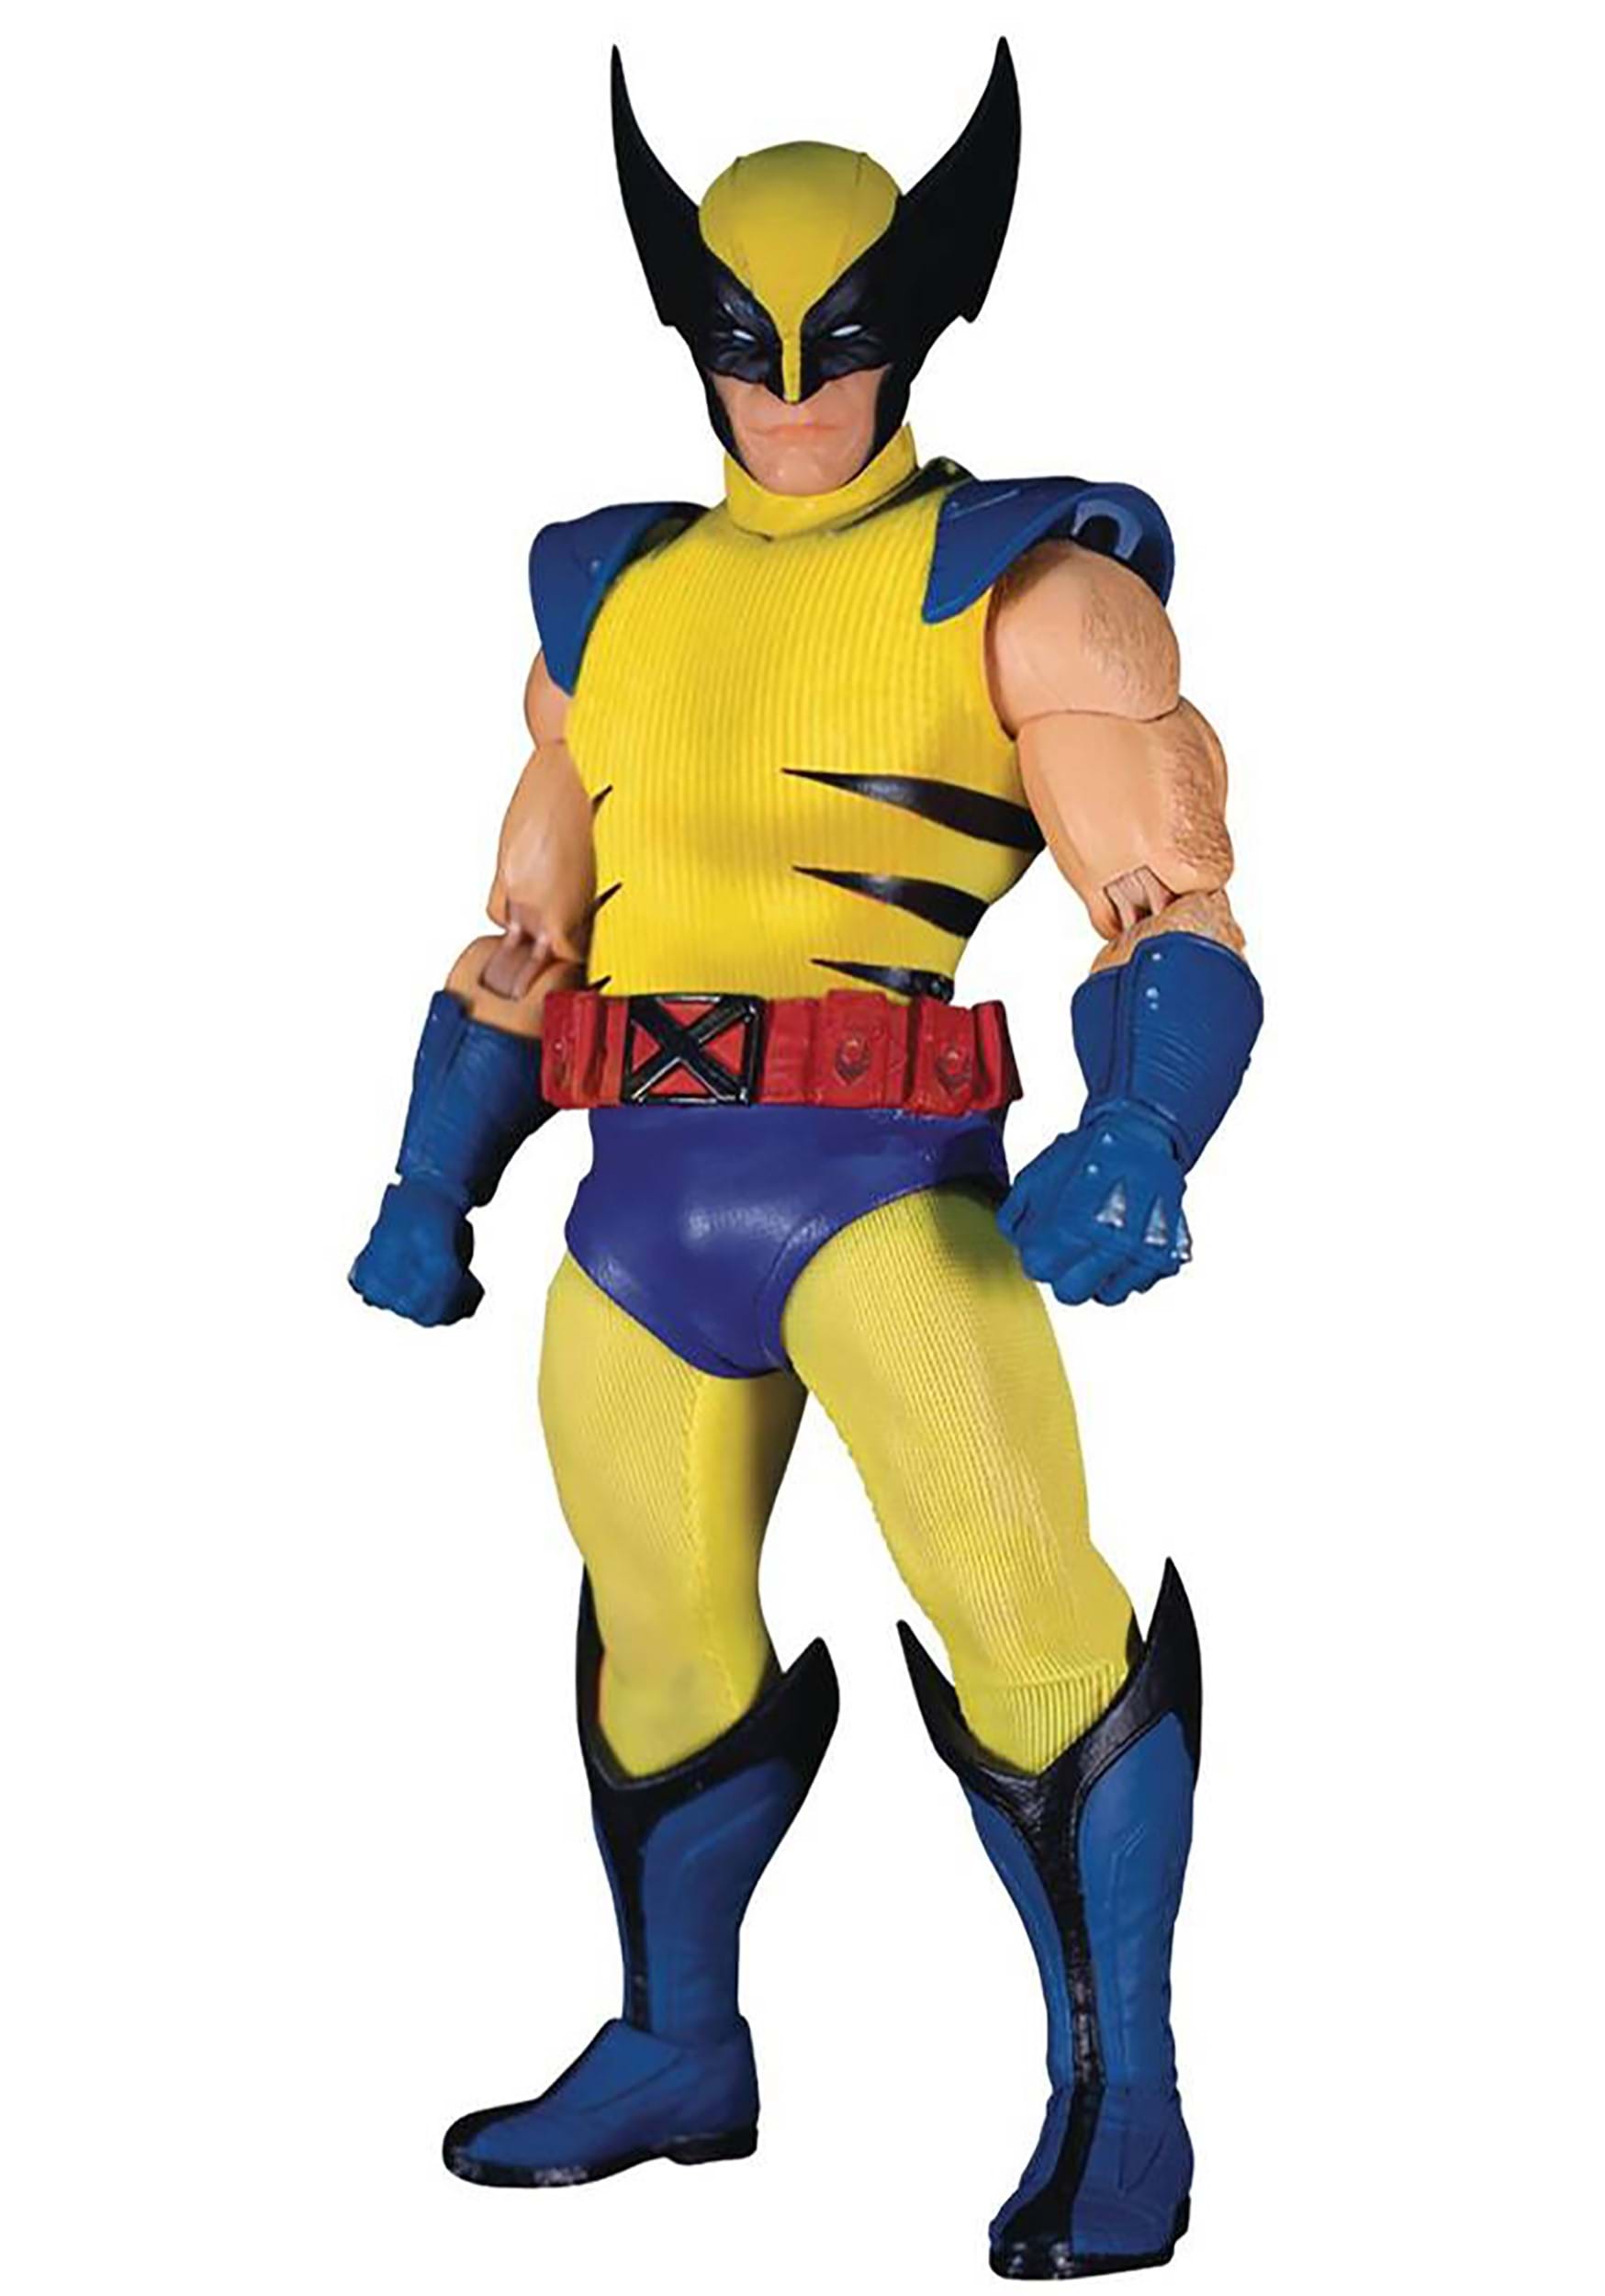 Marvel One:12 Collective Wolverine Deluxe Steel Box Action Figure